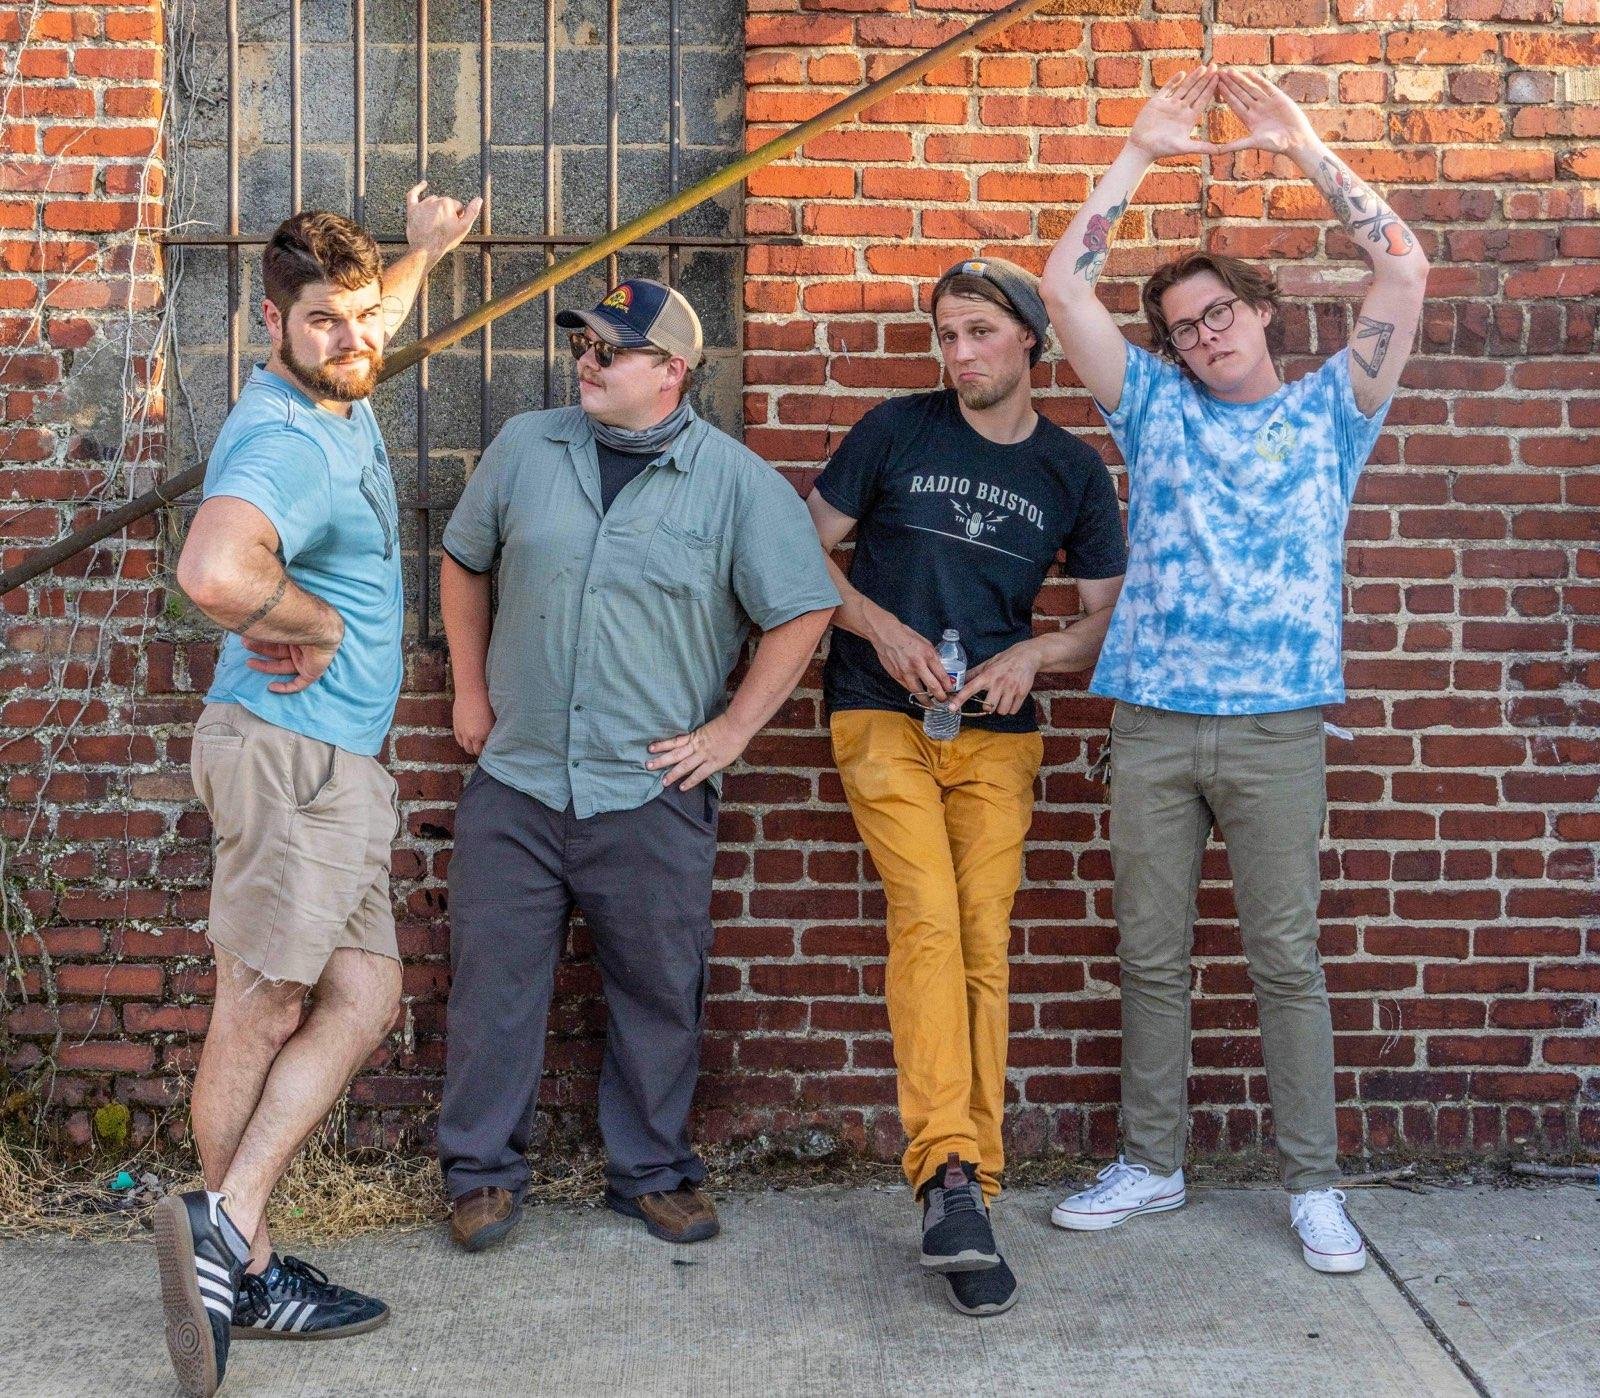 Donnie and the dry heavers pose in front of a brick wall